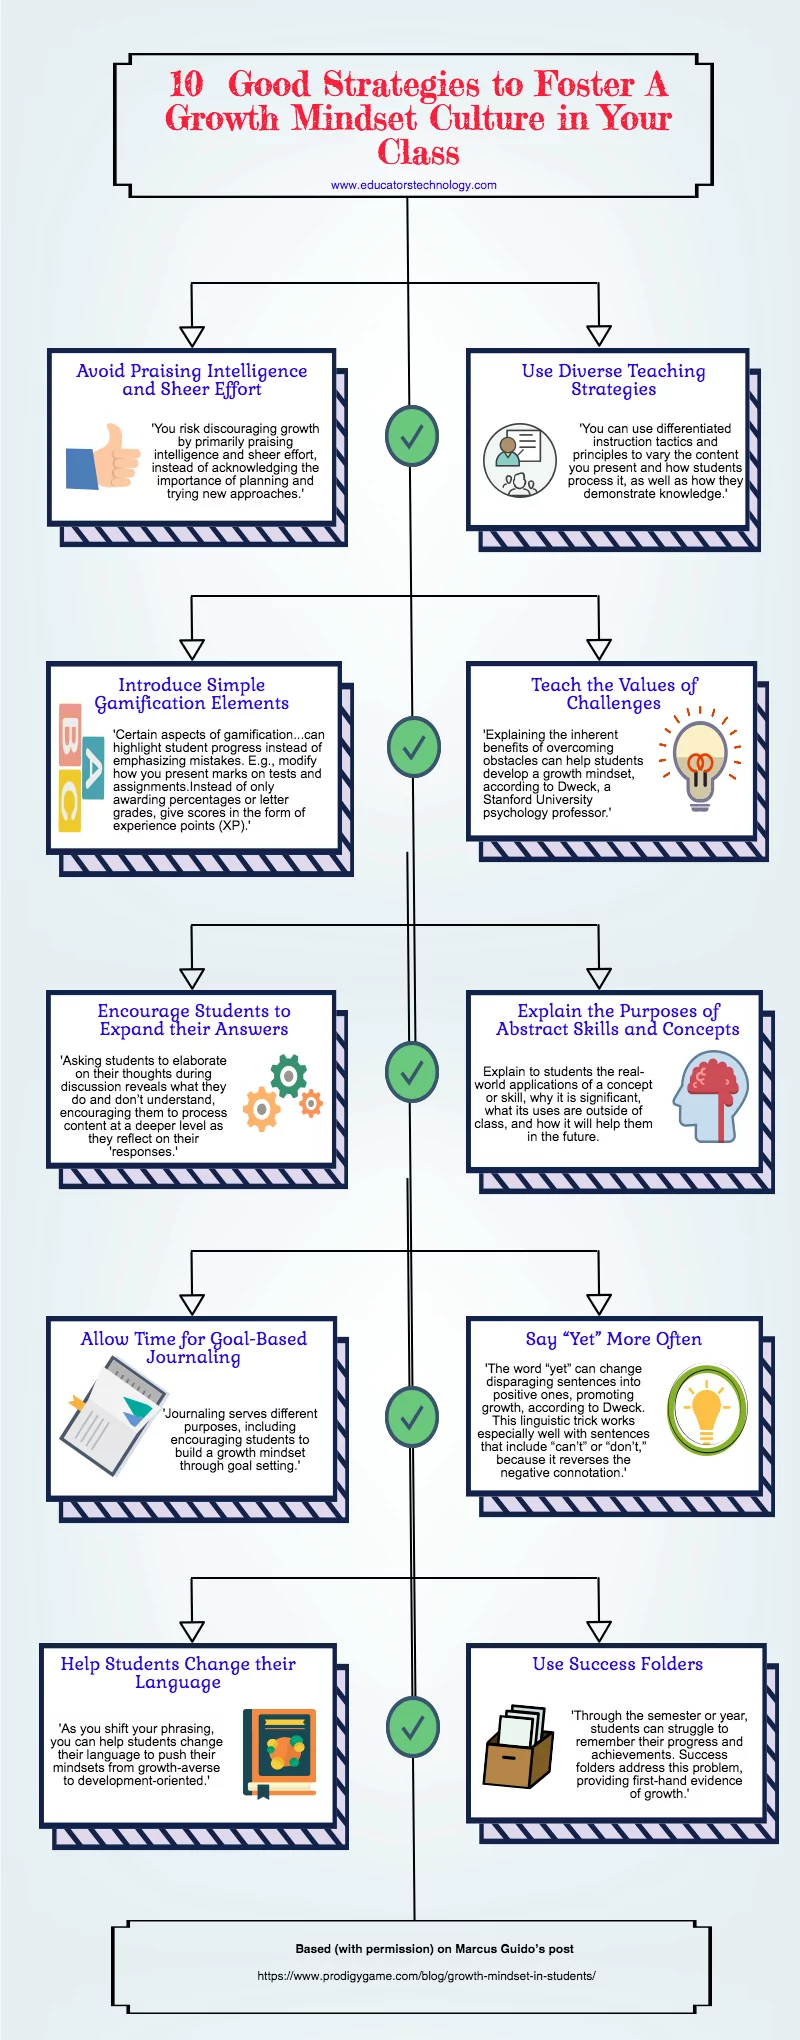 10  Good Strategies to Foster A Growth Mindset in Your Class